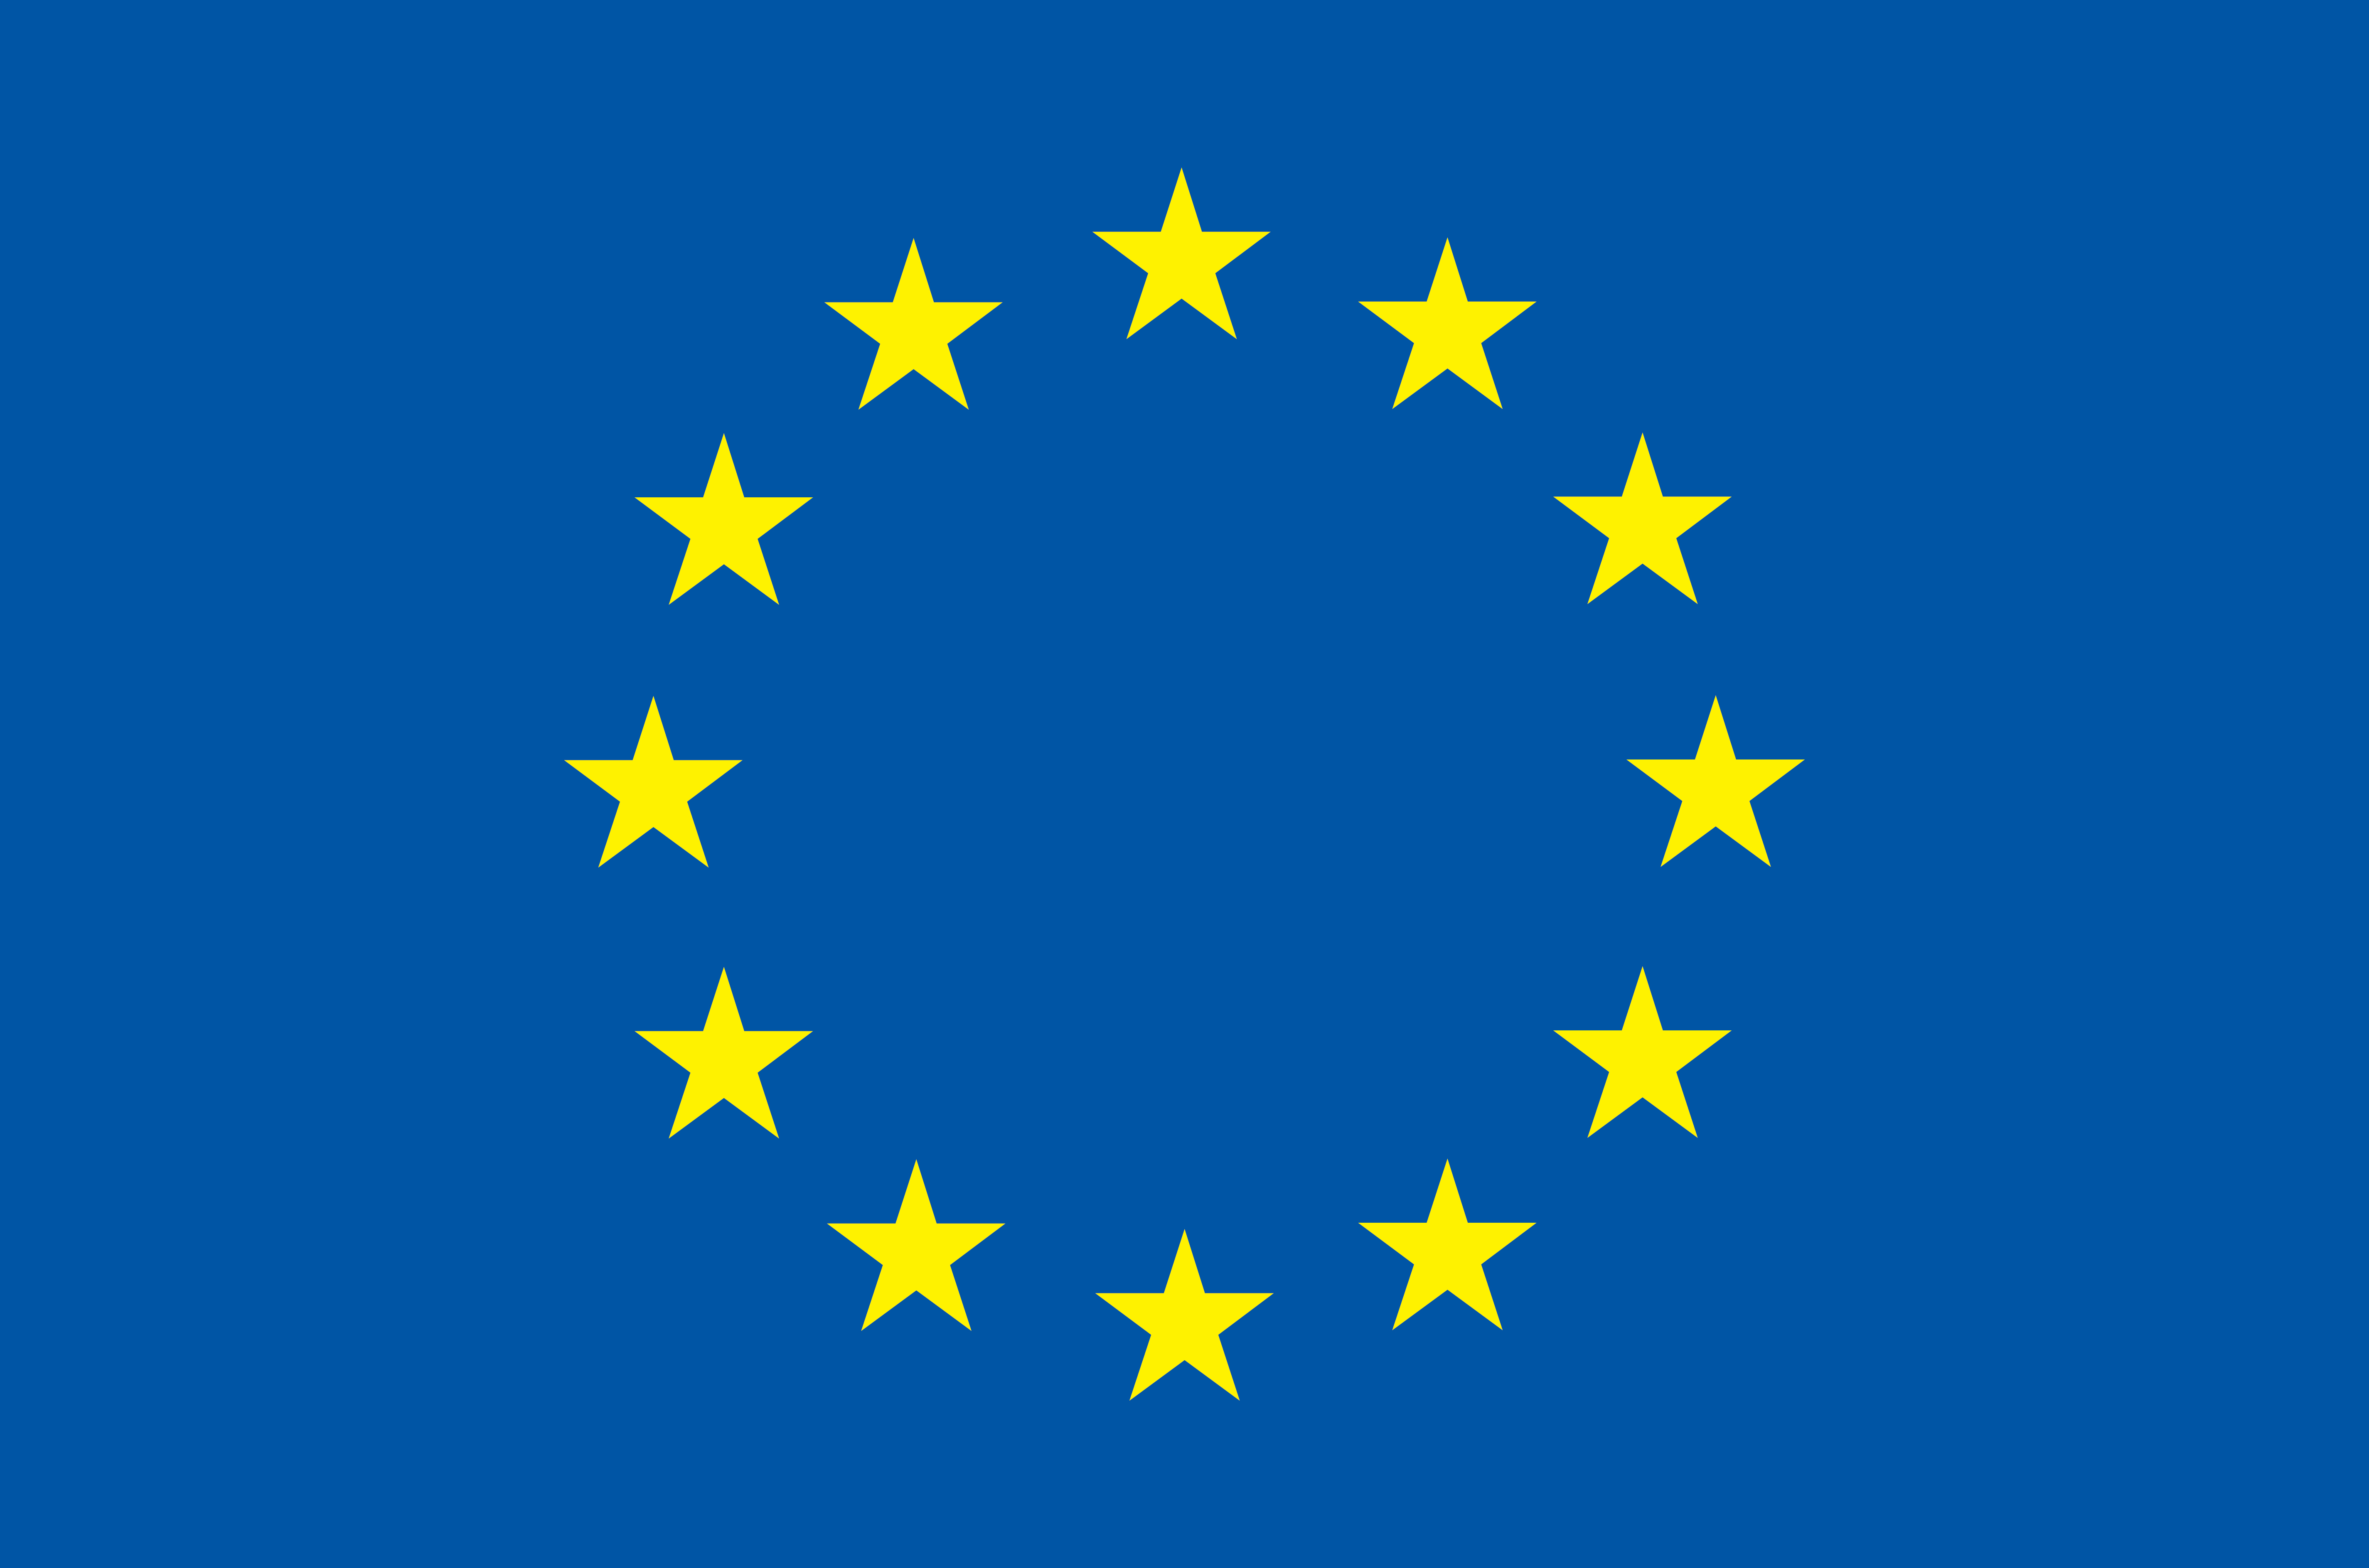 blue eu flag with 12 yellow stars in a circle in the middle